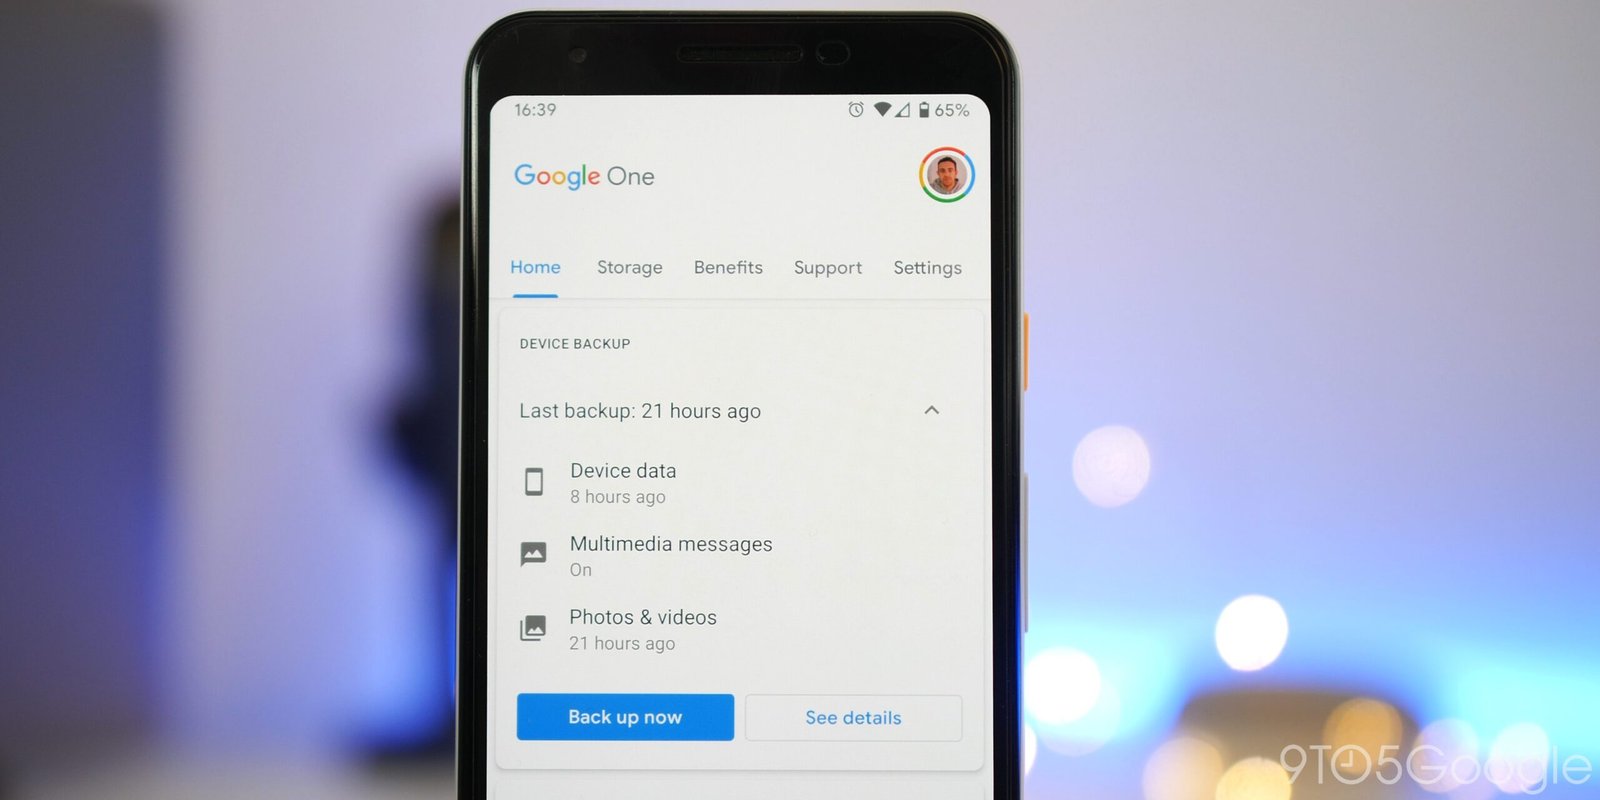 How to Backup/Restore Android Phone Using Google One